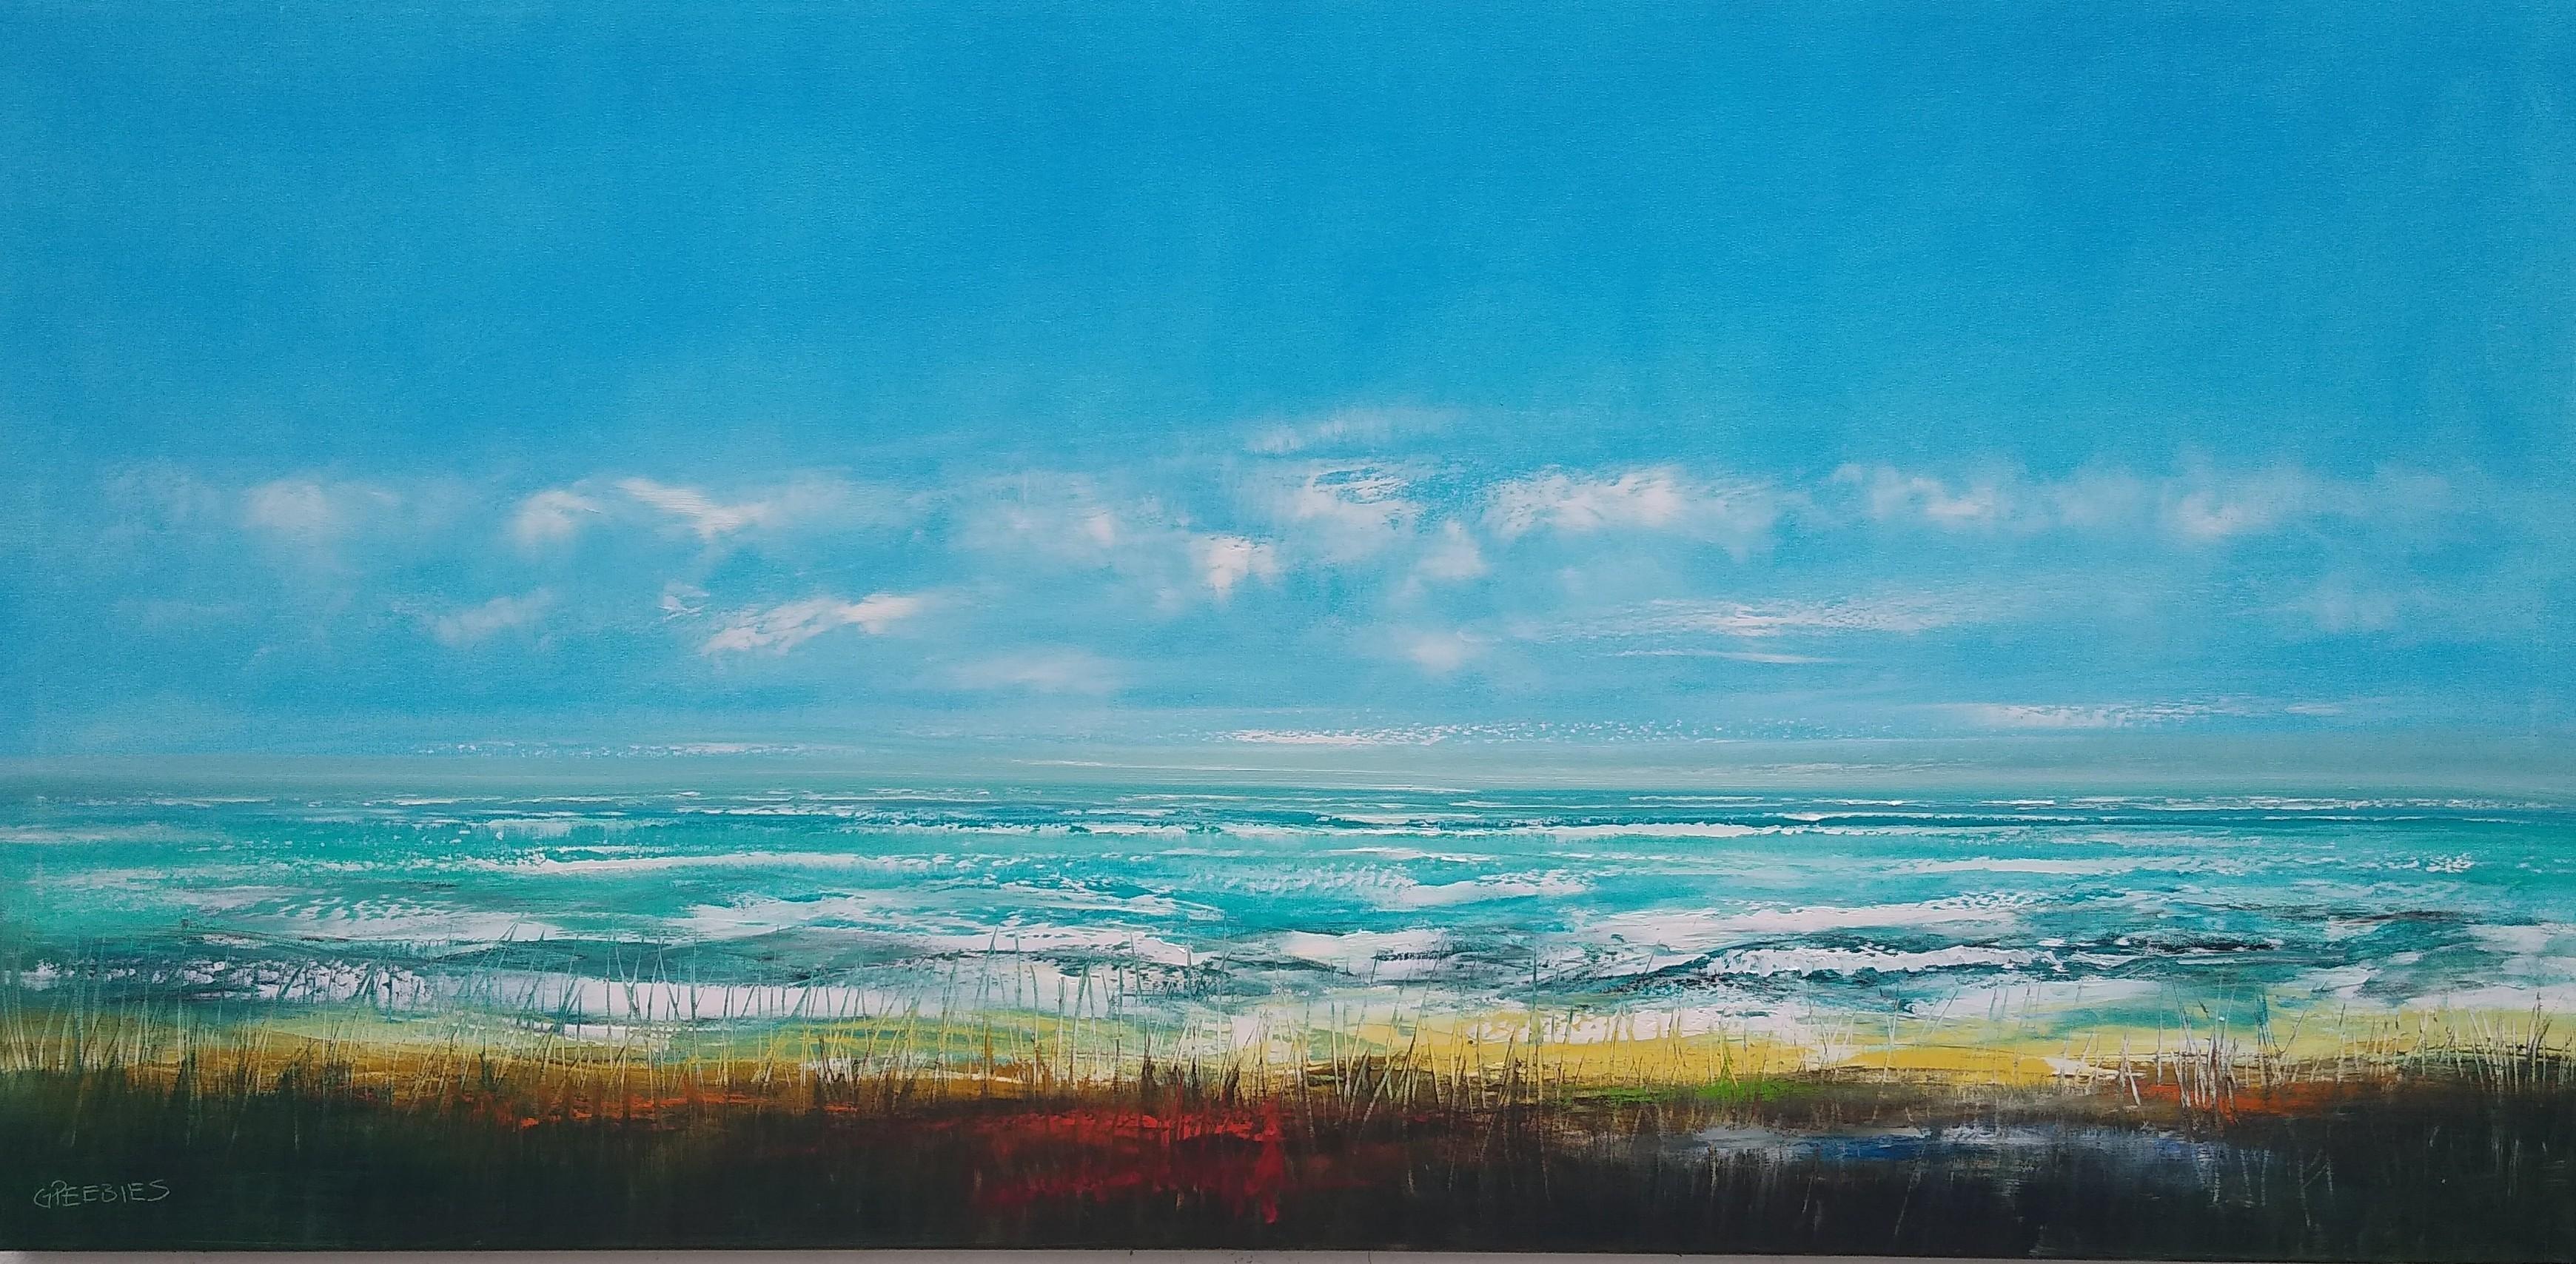 The Shoreline, Oil Painting